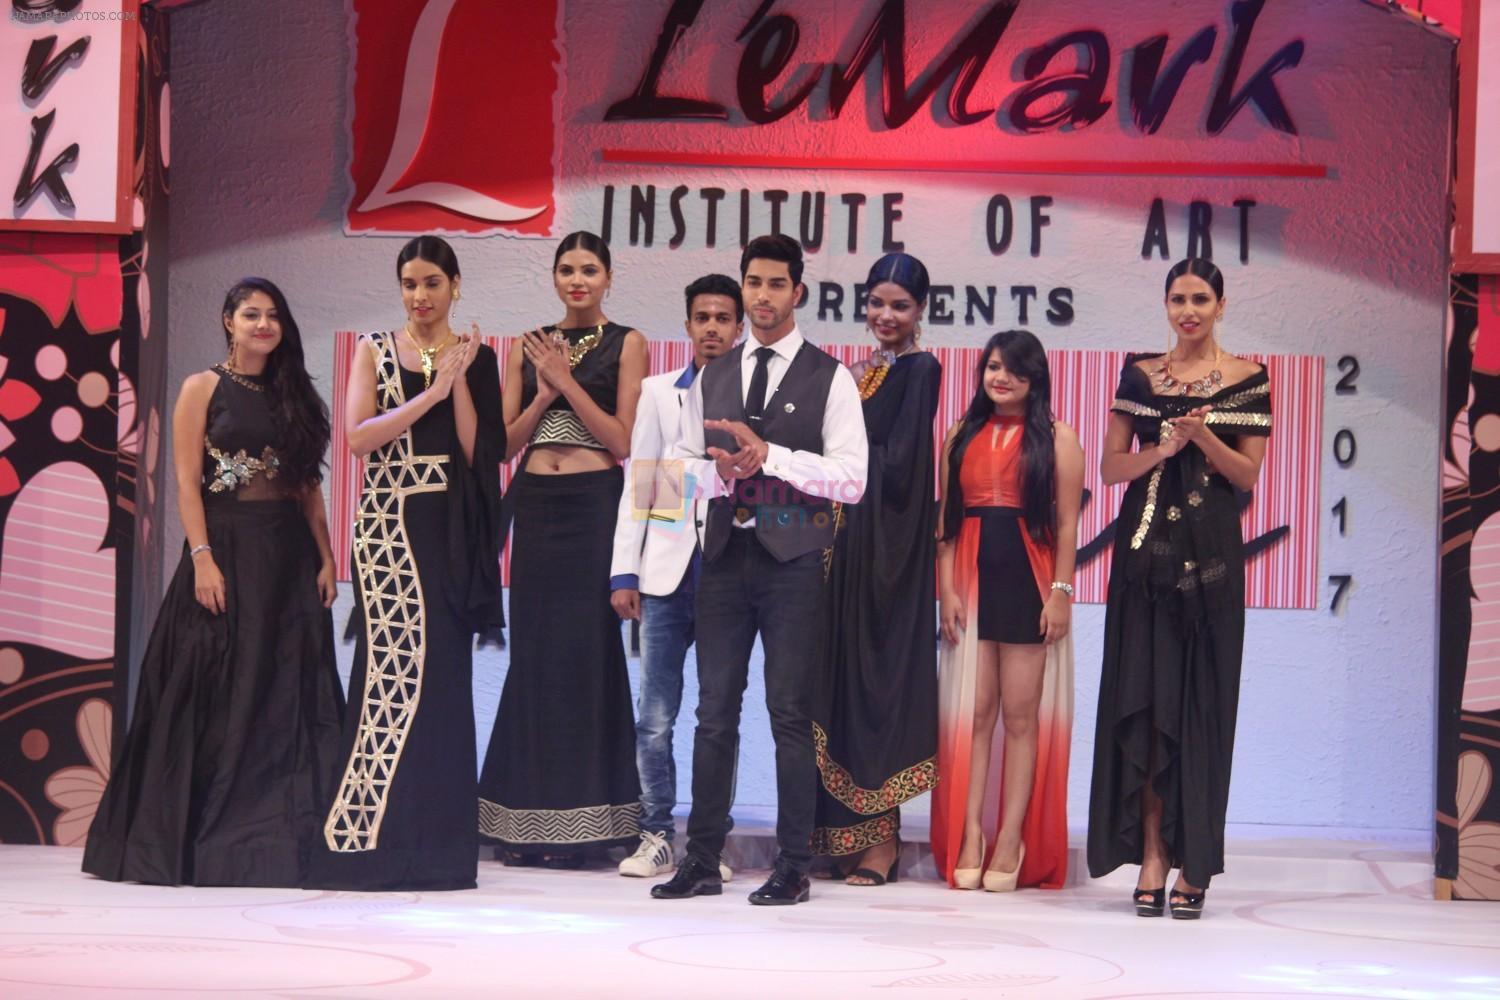 Model walk The Ramp For Le_Mark Institute Of Art on 21st May 2017